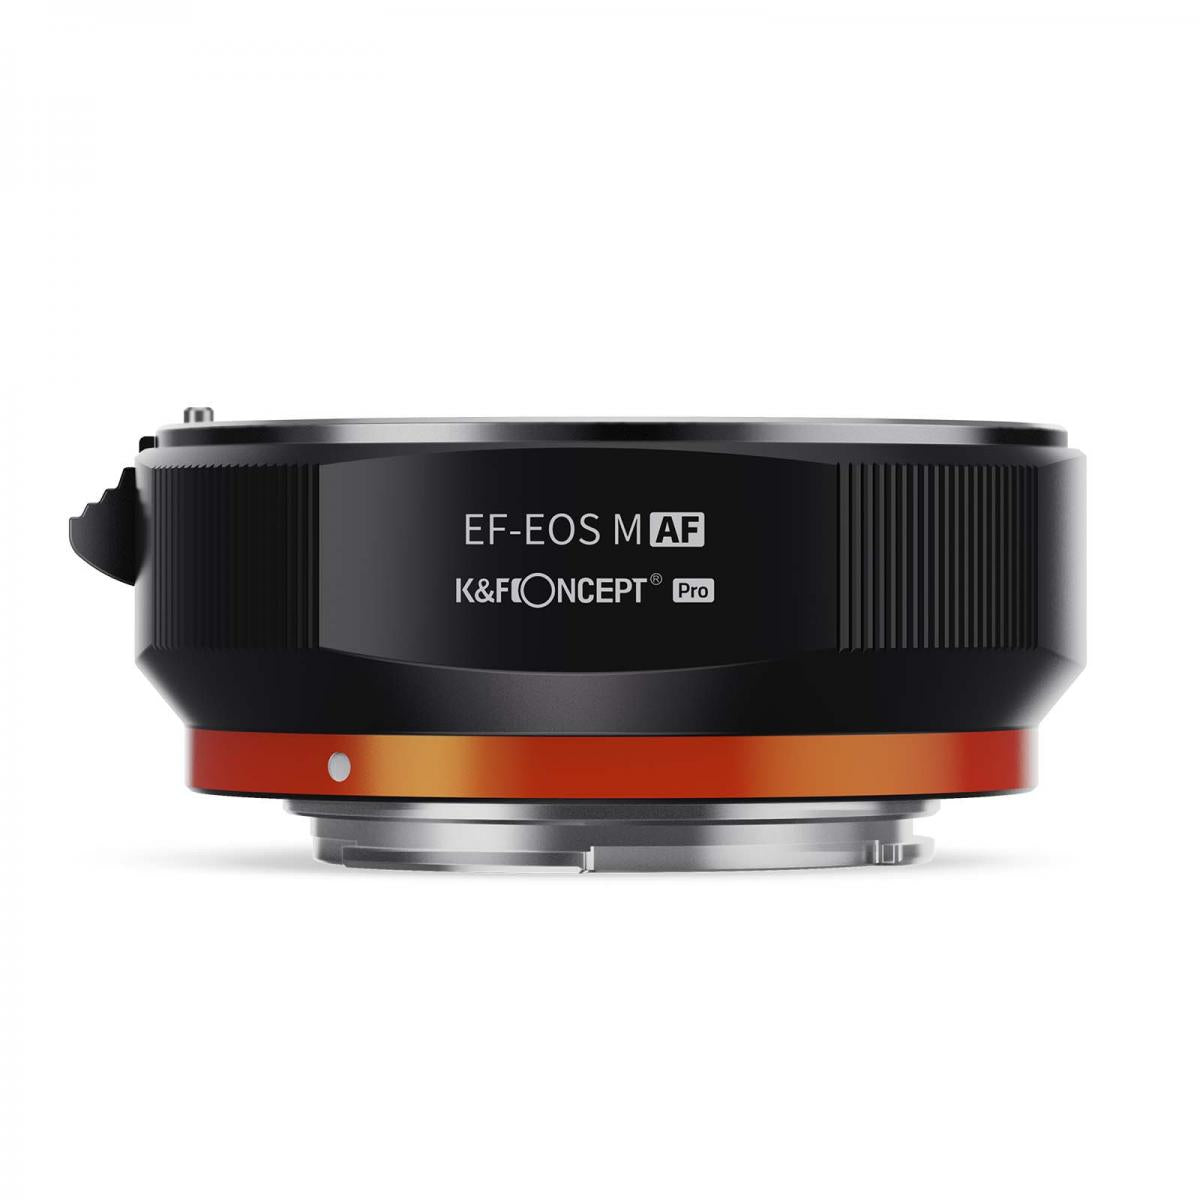 K&amp;F PRO Auto Focus Lens Adapter for Canon EF and EF-S Lenses to Canon M Mount - KF06-464